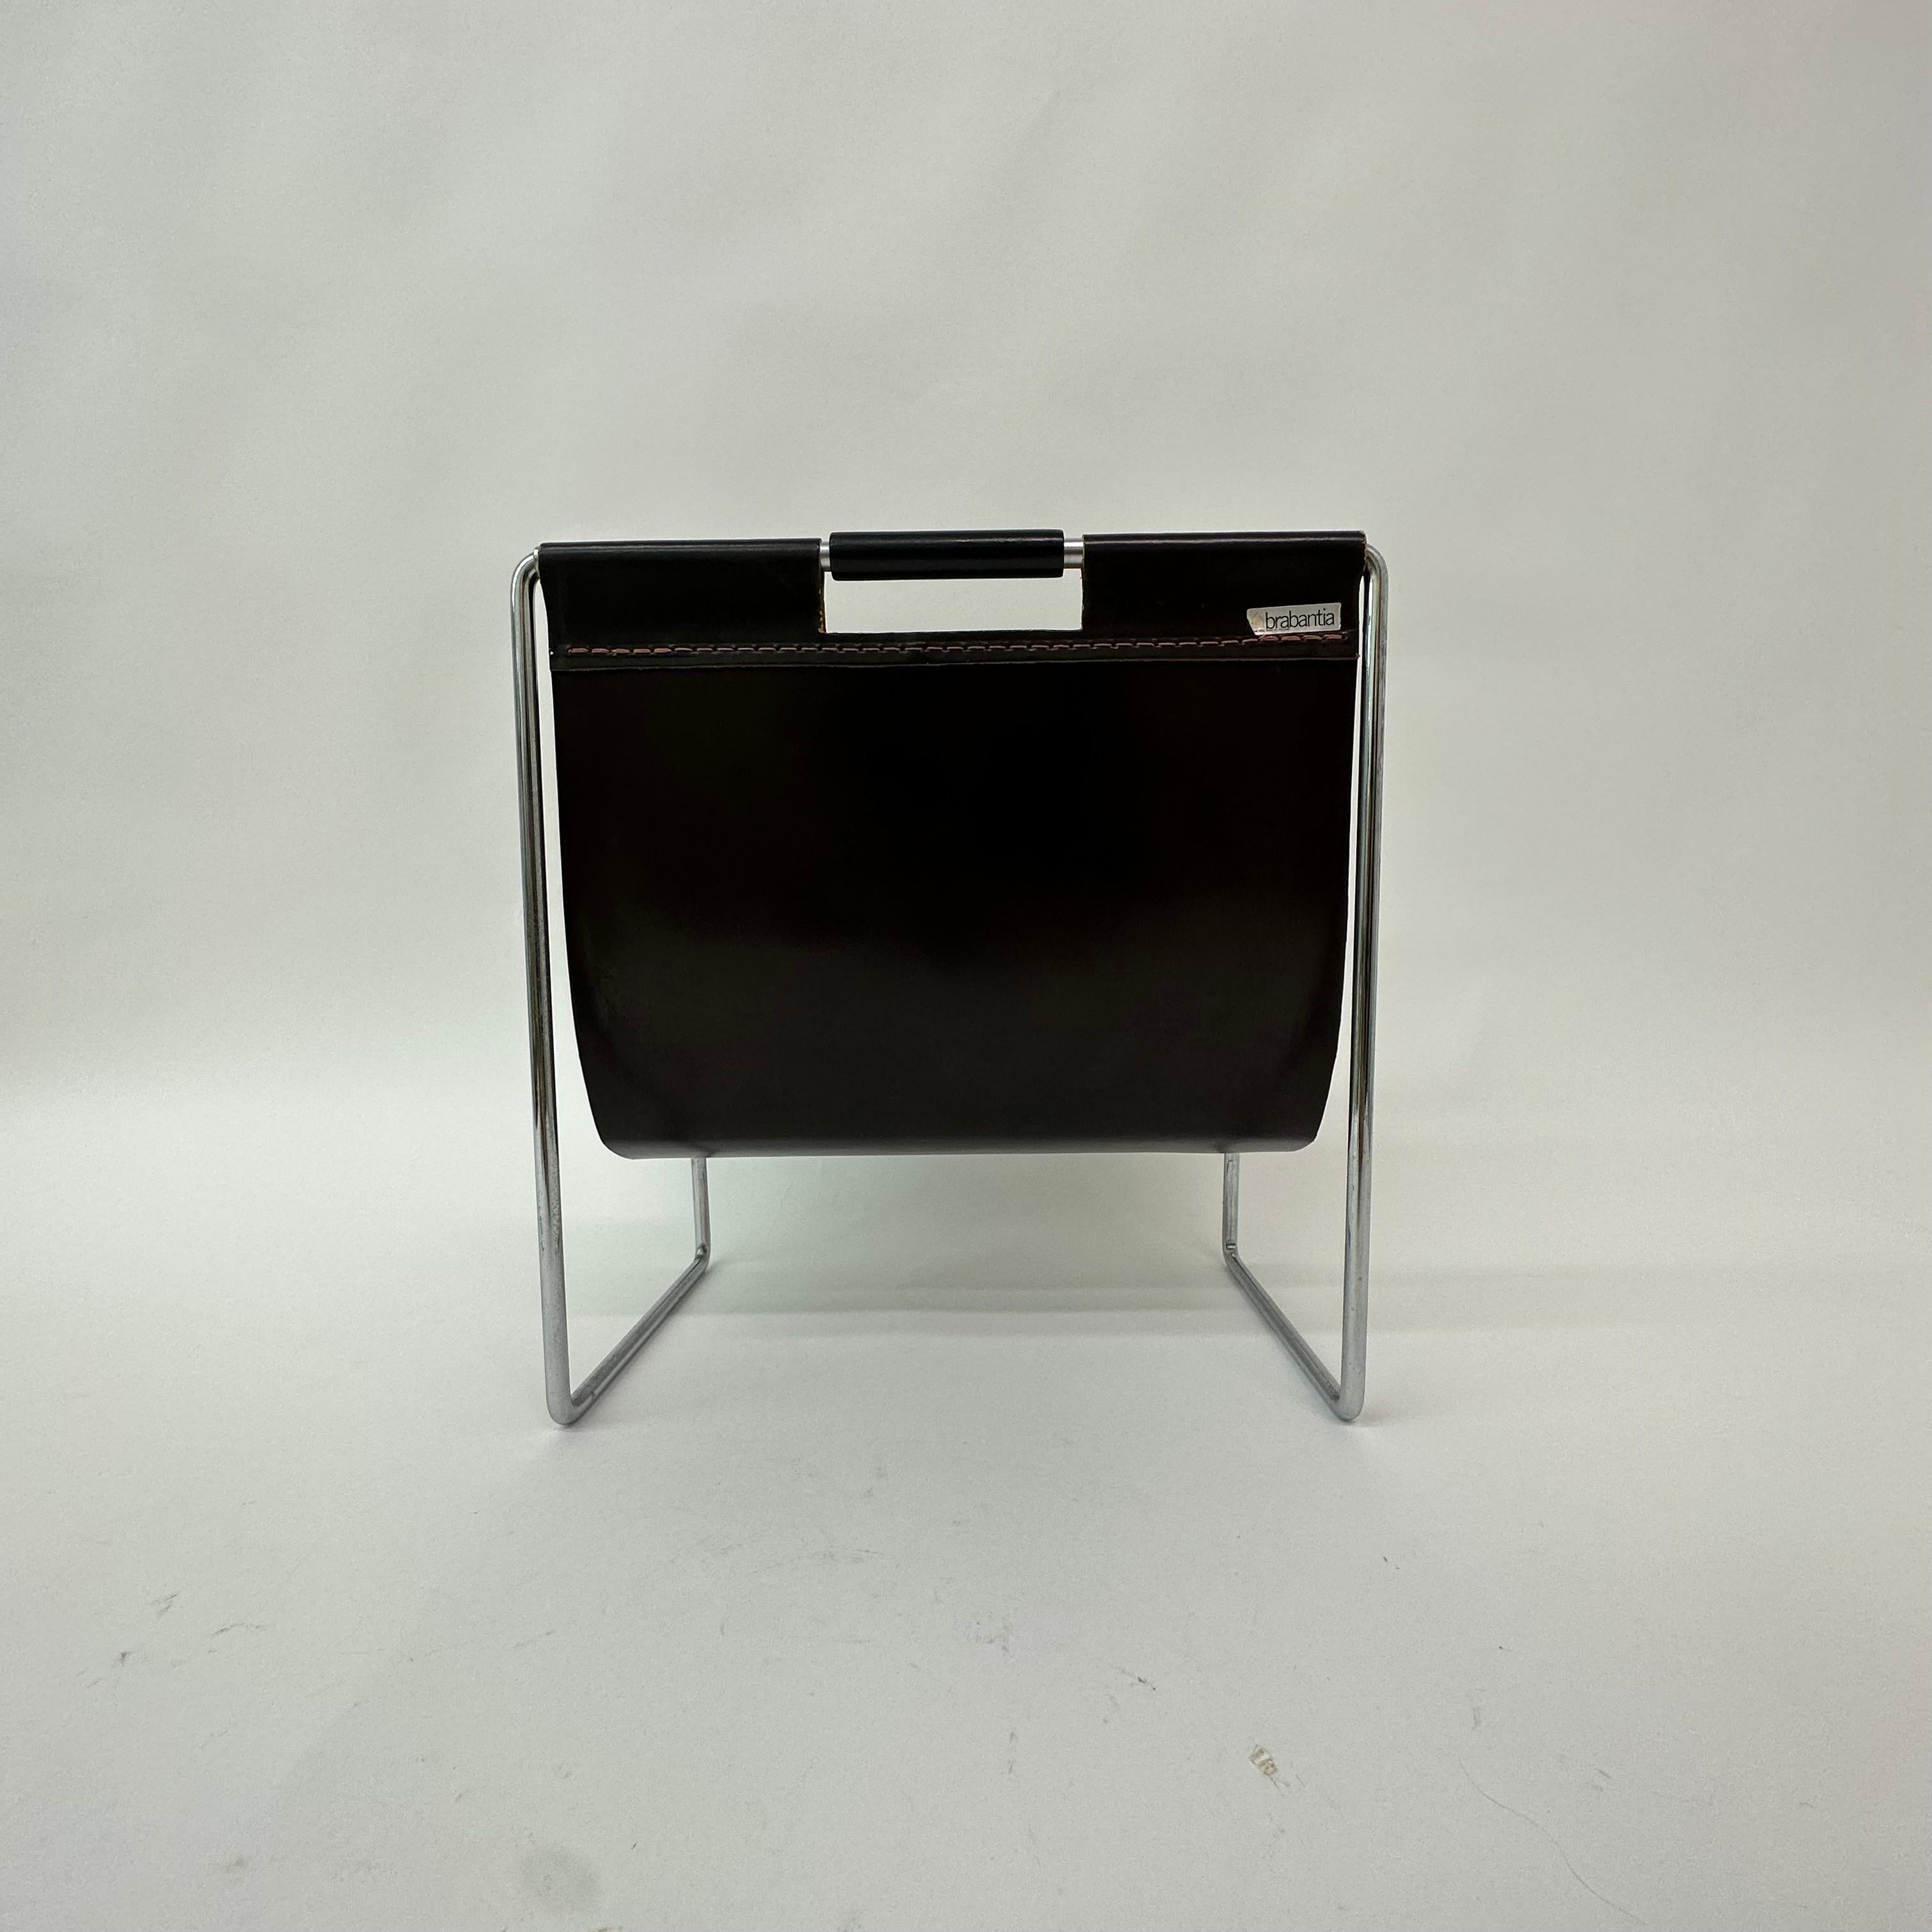 In vintage condition, a beautiful industrial Canterbury / magazine rack made of leather, two wooden handles and with a chrome metal frame, produced by the Brabantia Holland manufacturer and Dadime, which was a furniture brand of Brabantia. Please